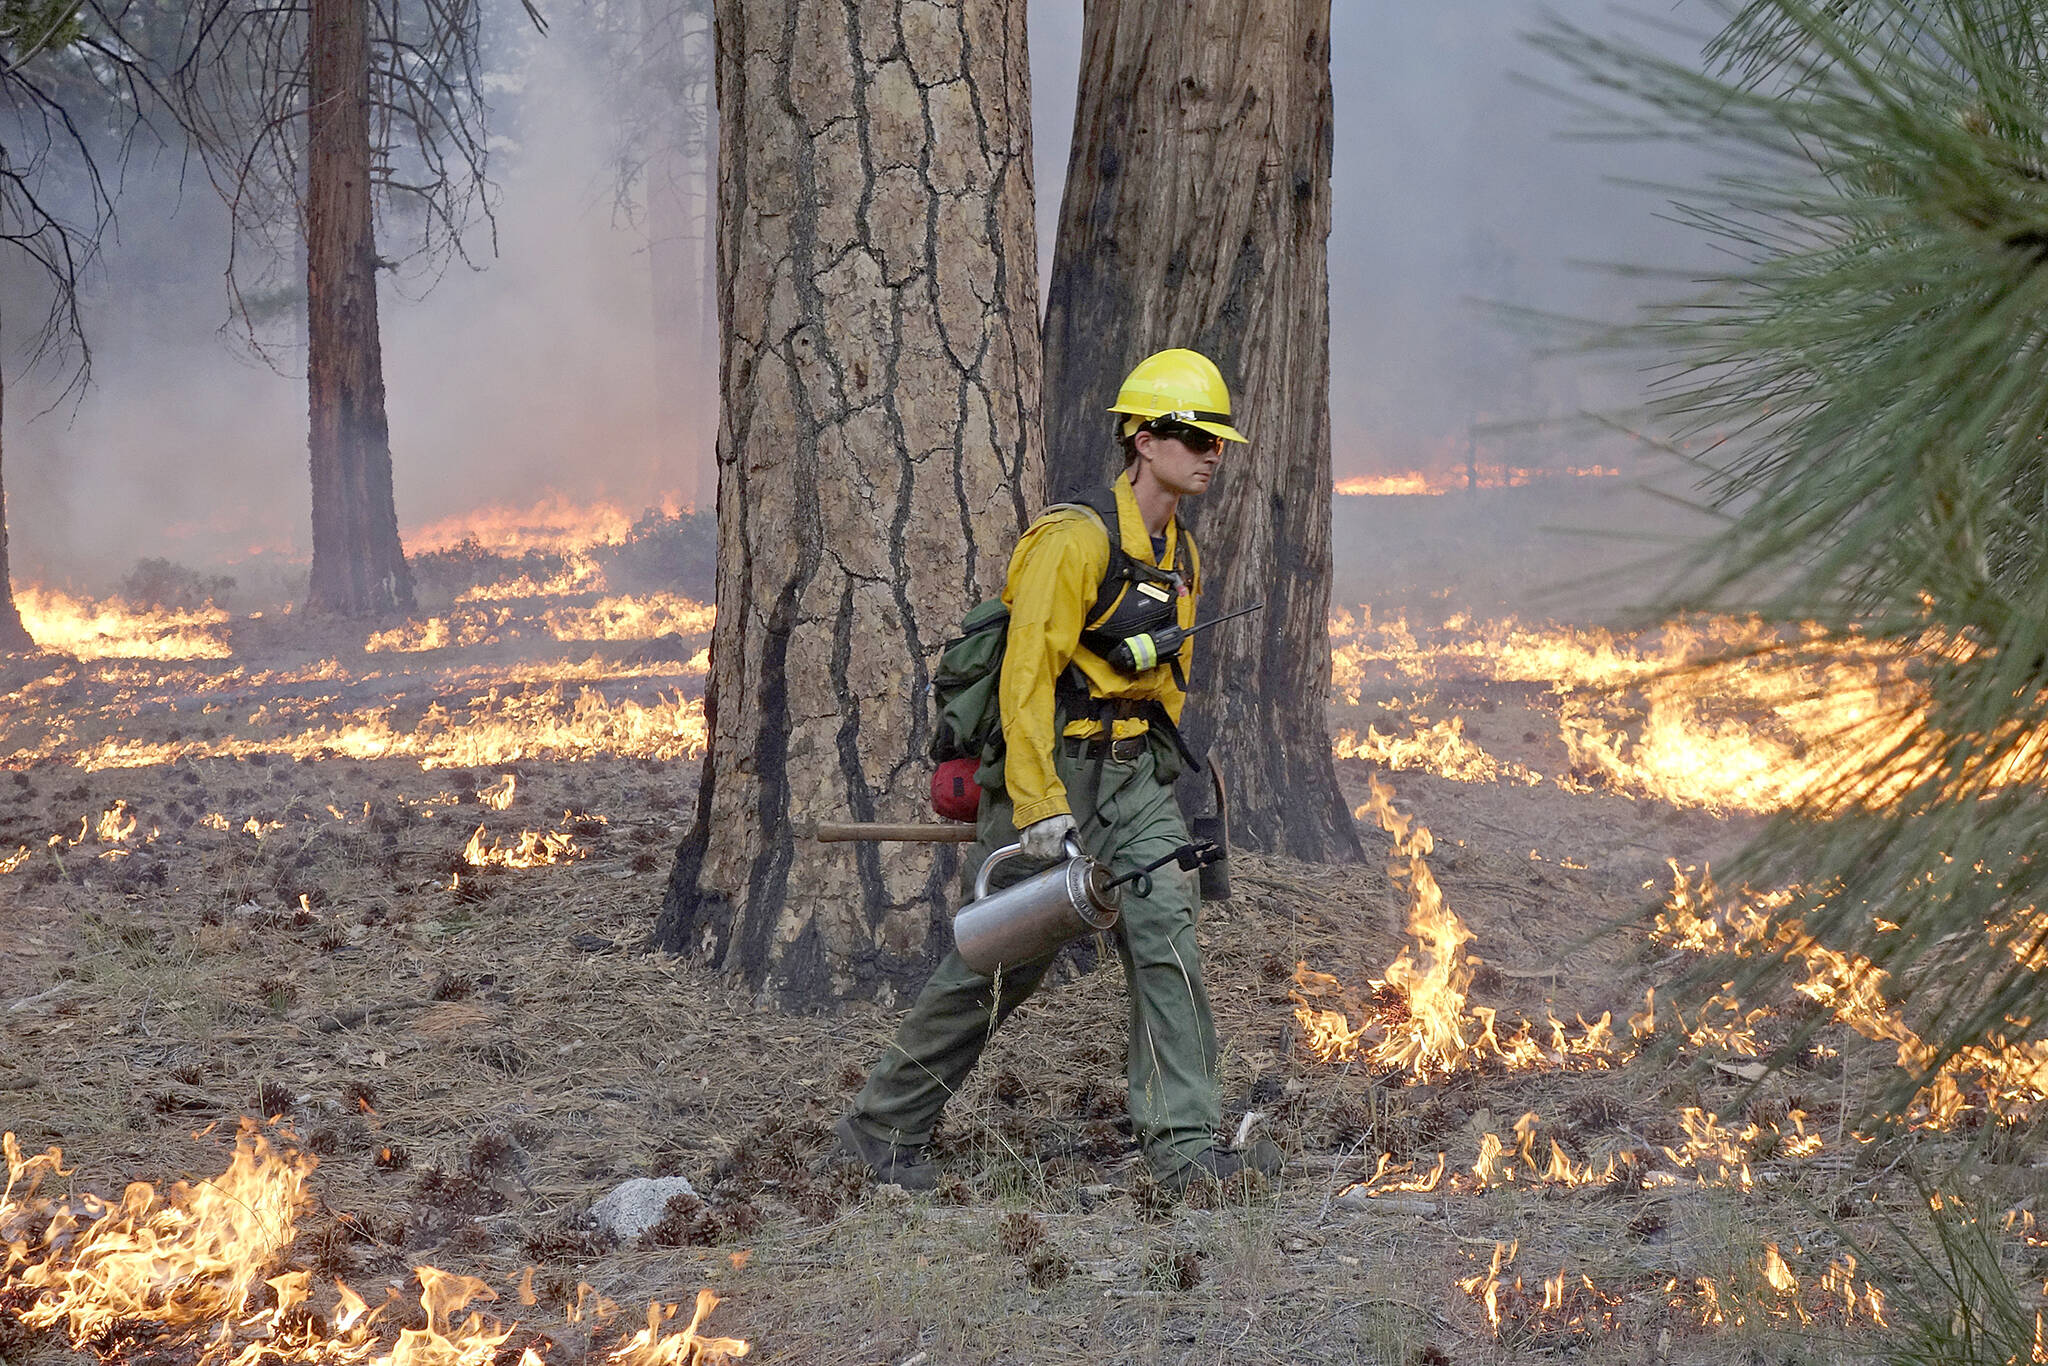 In this June 11, 2019 file photo, firefighter Andrew Pettit walks among the flames during a prescribed fire in Cedar Grove at Kings Canyon National Park, Calif. (Brian Melley/The Associated Press)